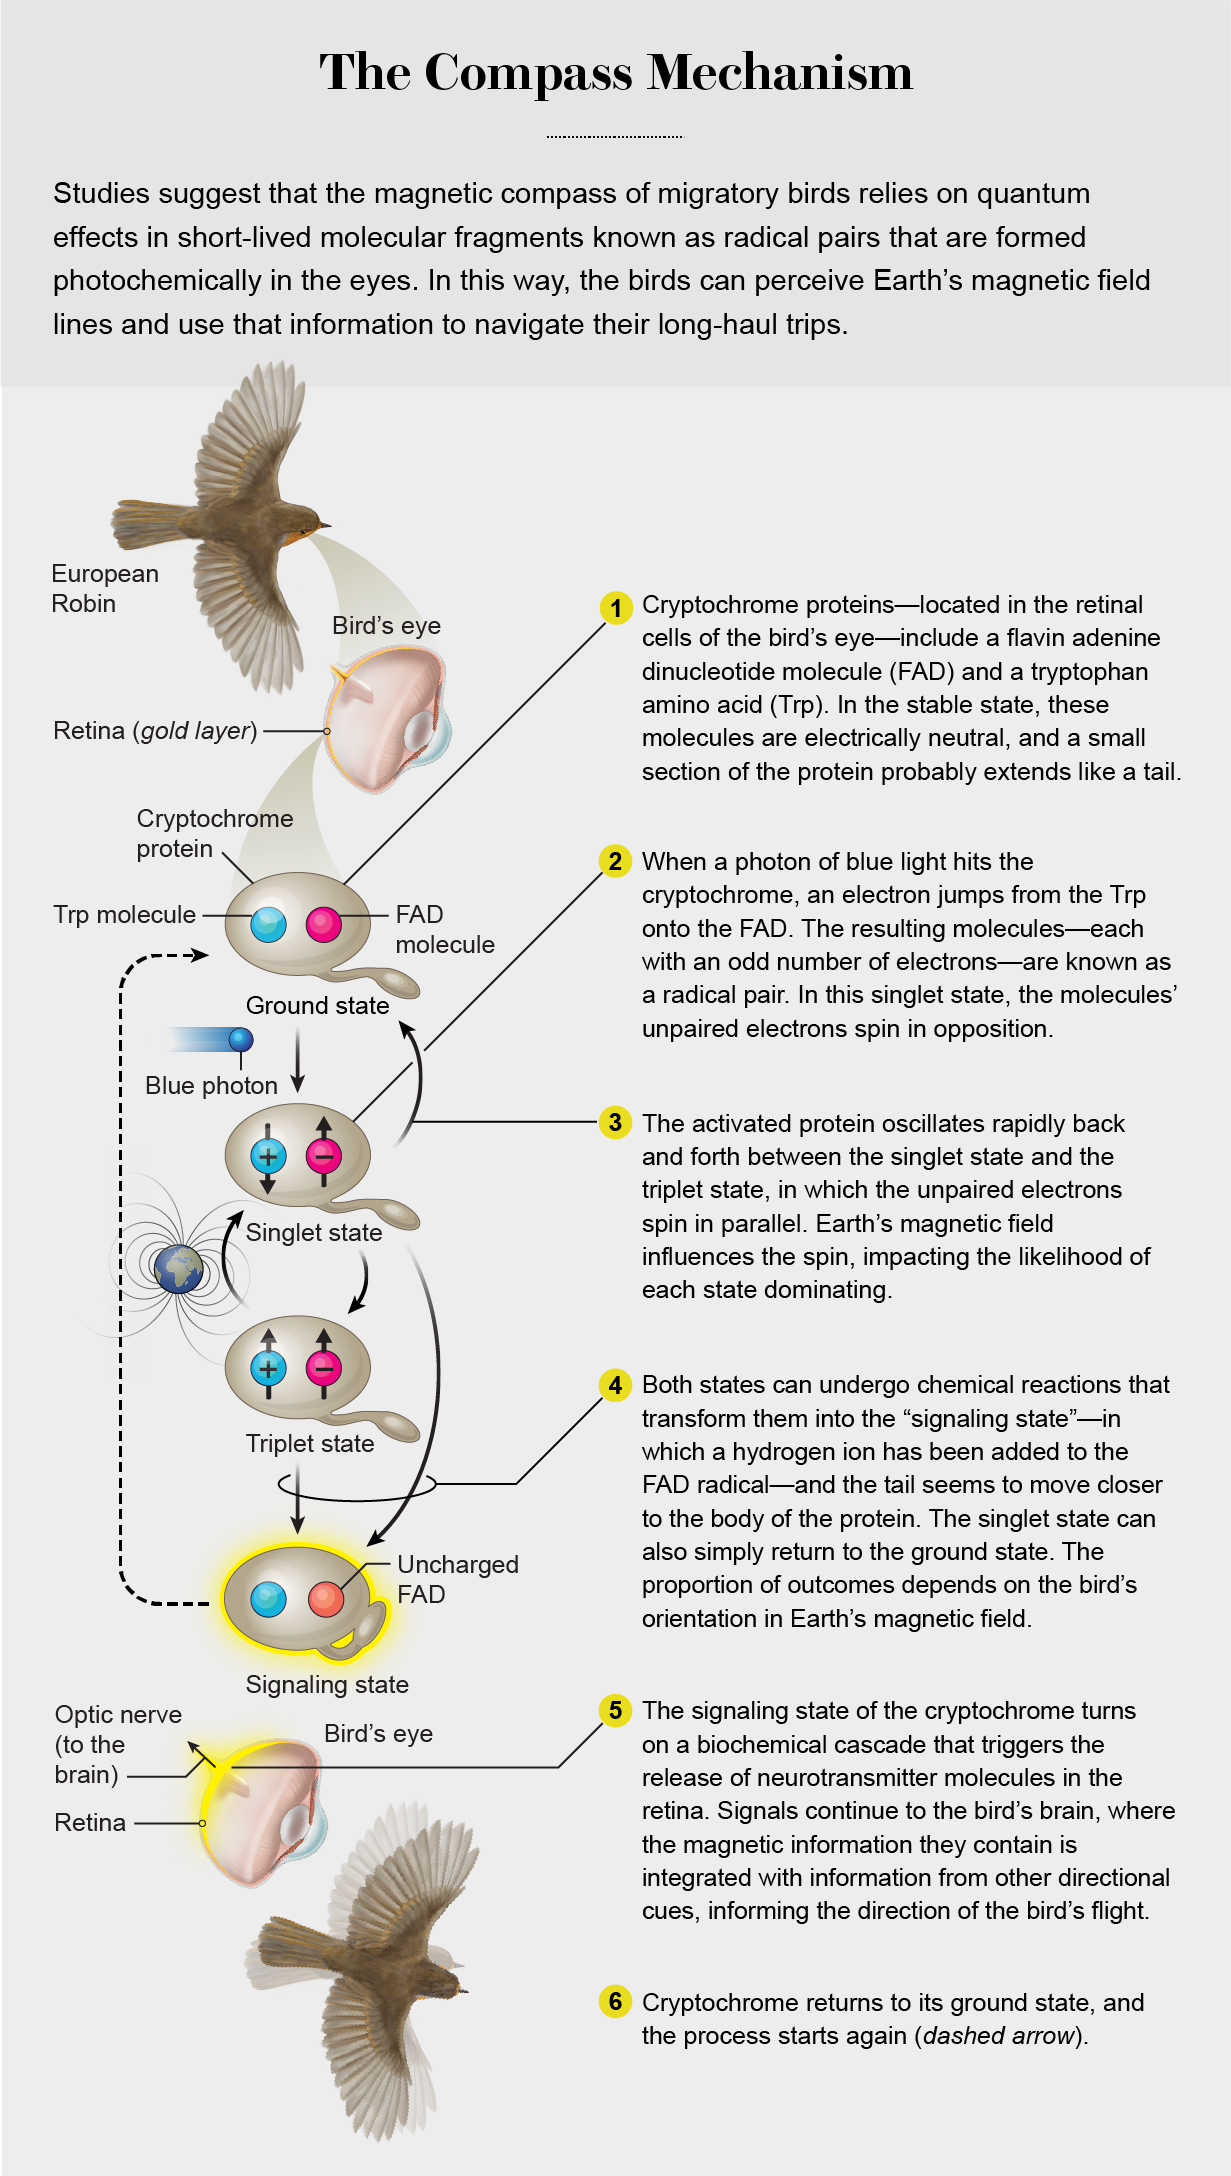 Graphic shows how cryptochromes send molecular signals about Earth’s magnetic field from a bird’s retina to its brain.